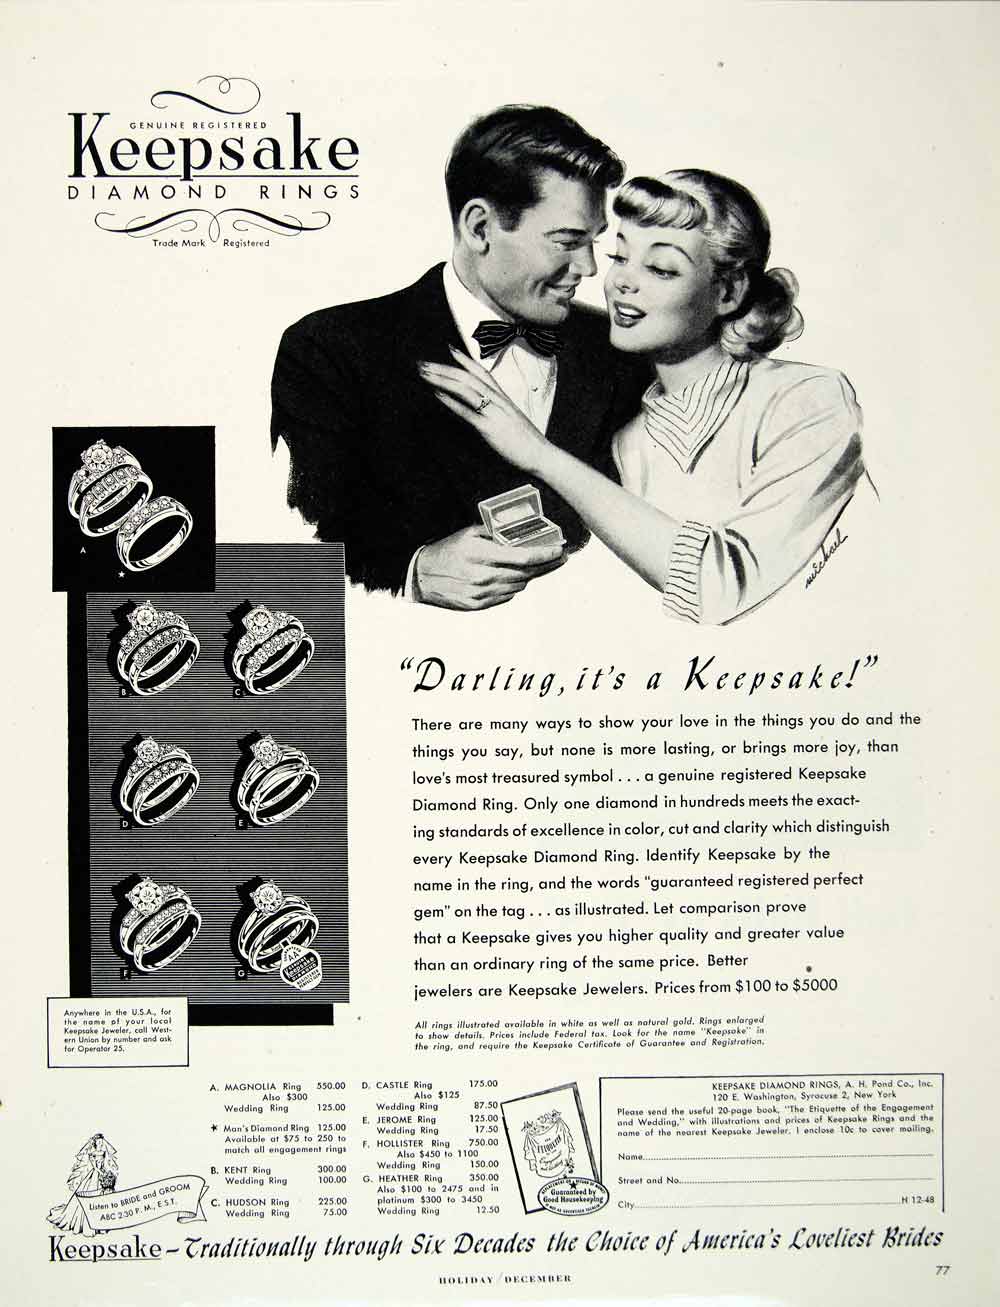 Fun to look at old ads for enagagement rings. Our Dad carried this brand  for decades. We still see some come through for ring cleanings! / LaRog  Diamond Corner